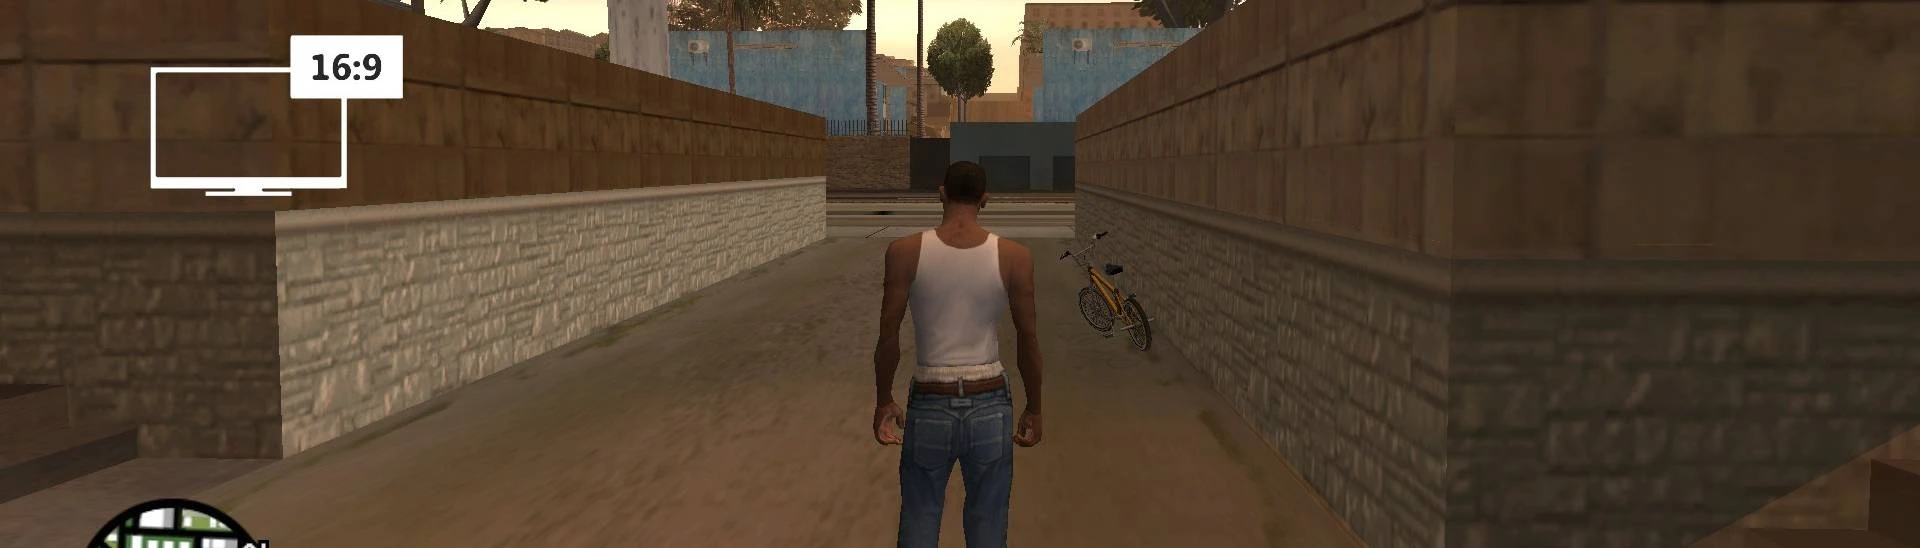 Download Grand Theft Auto: San Andreas Patch 2 for Windows 